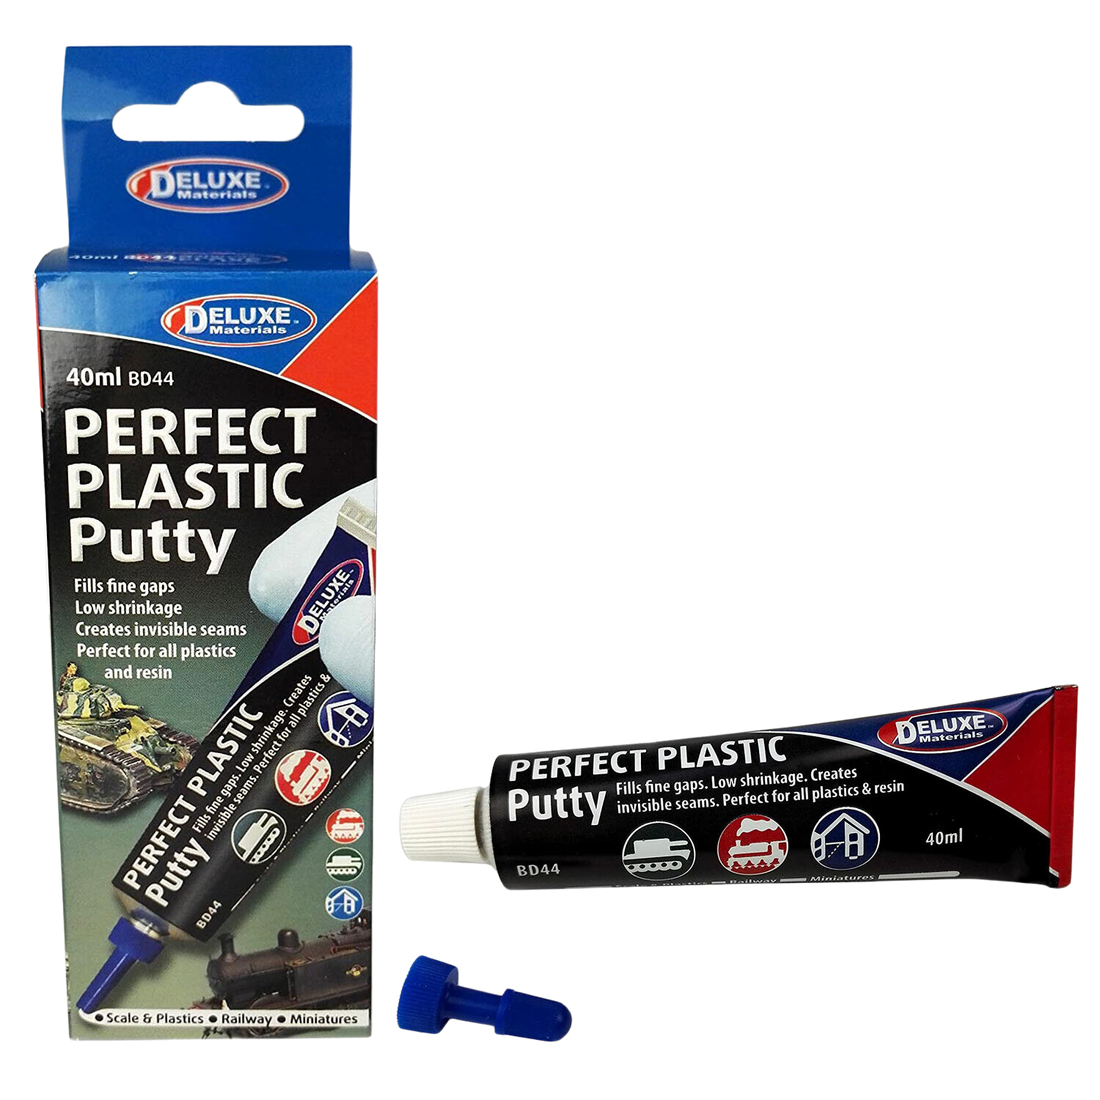 Deluxe - Perfect Plastic Putty